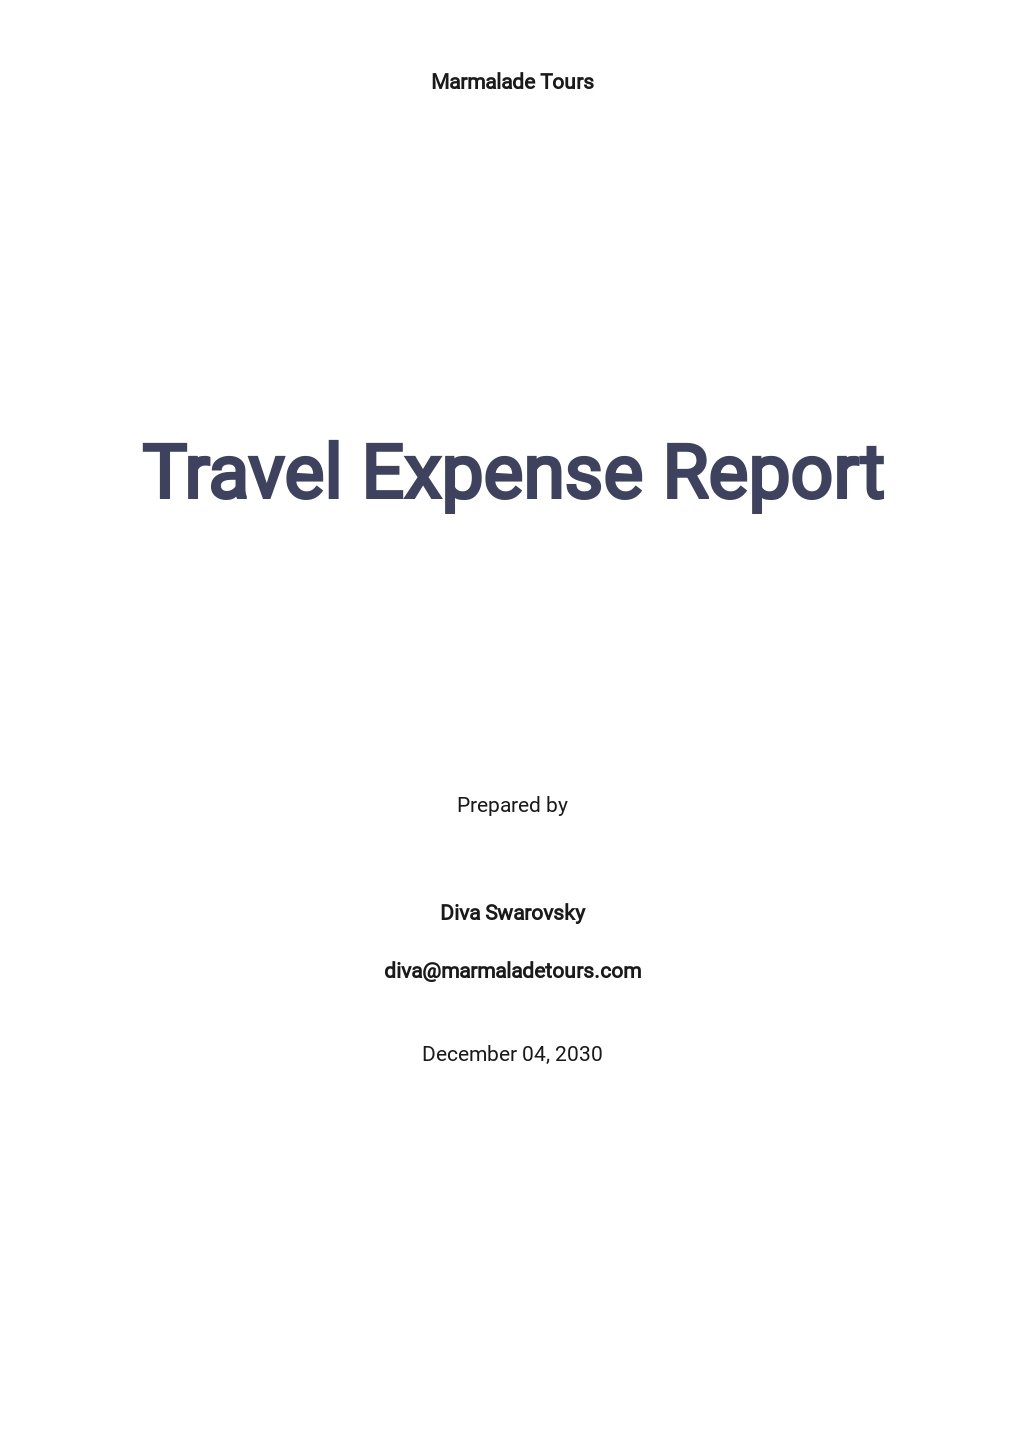 Travel Expense Report Template in Google Docs, Word